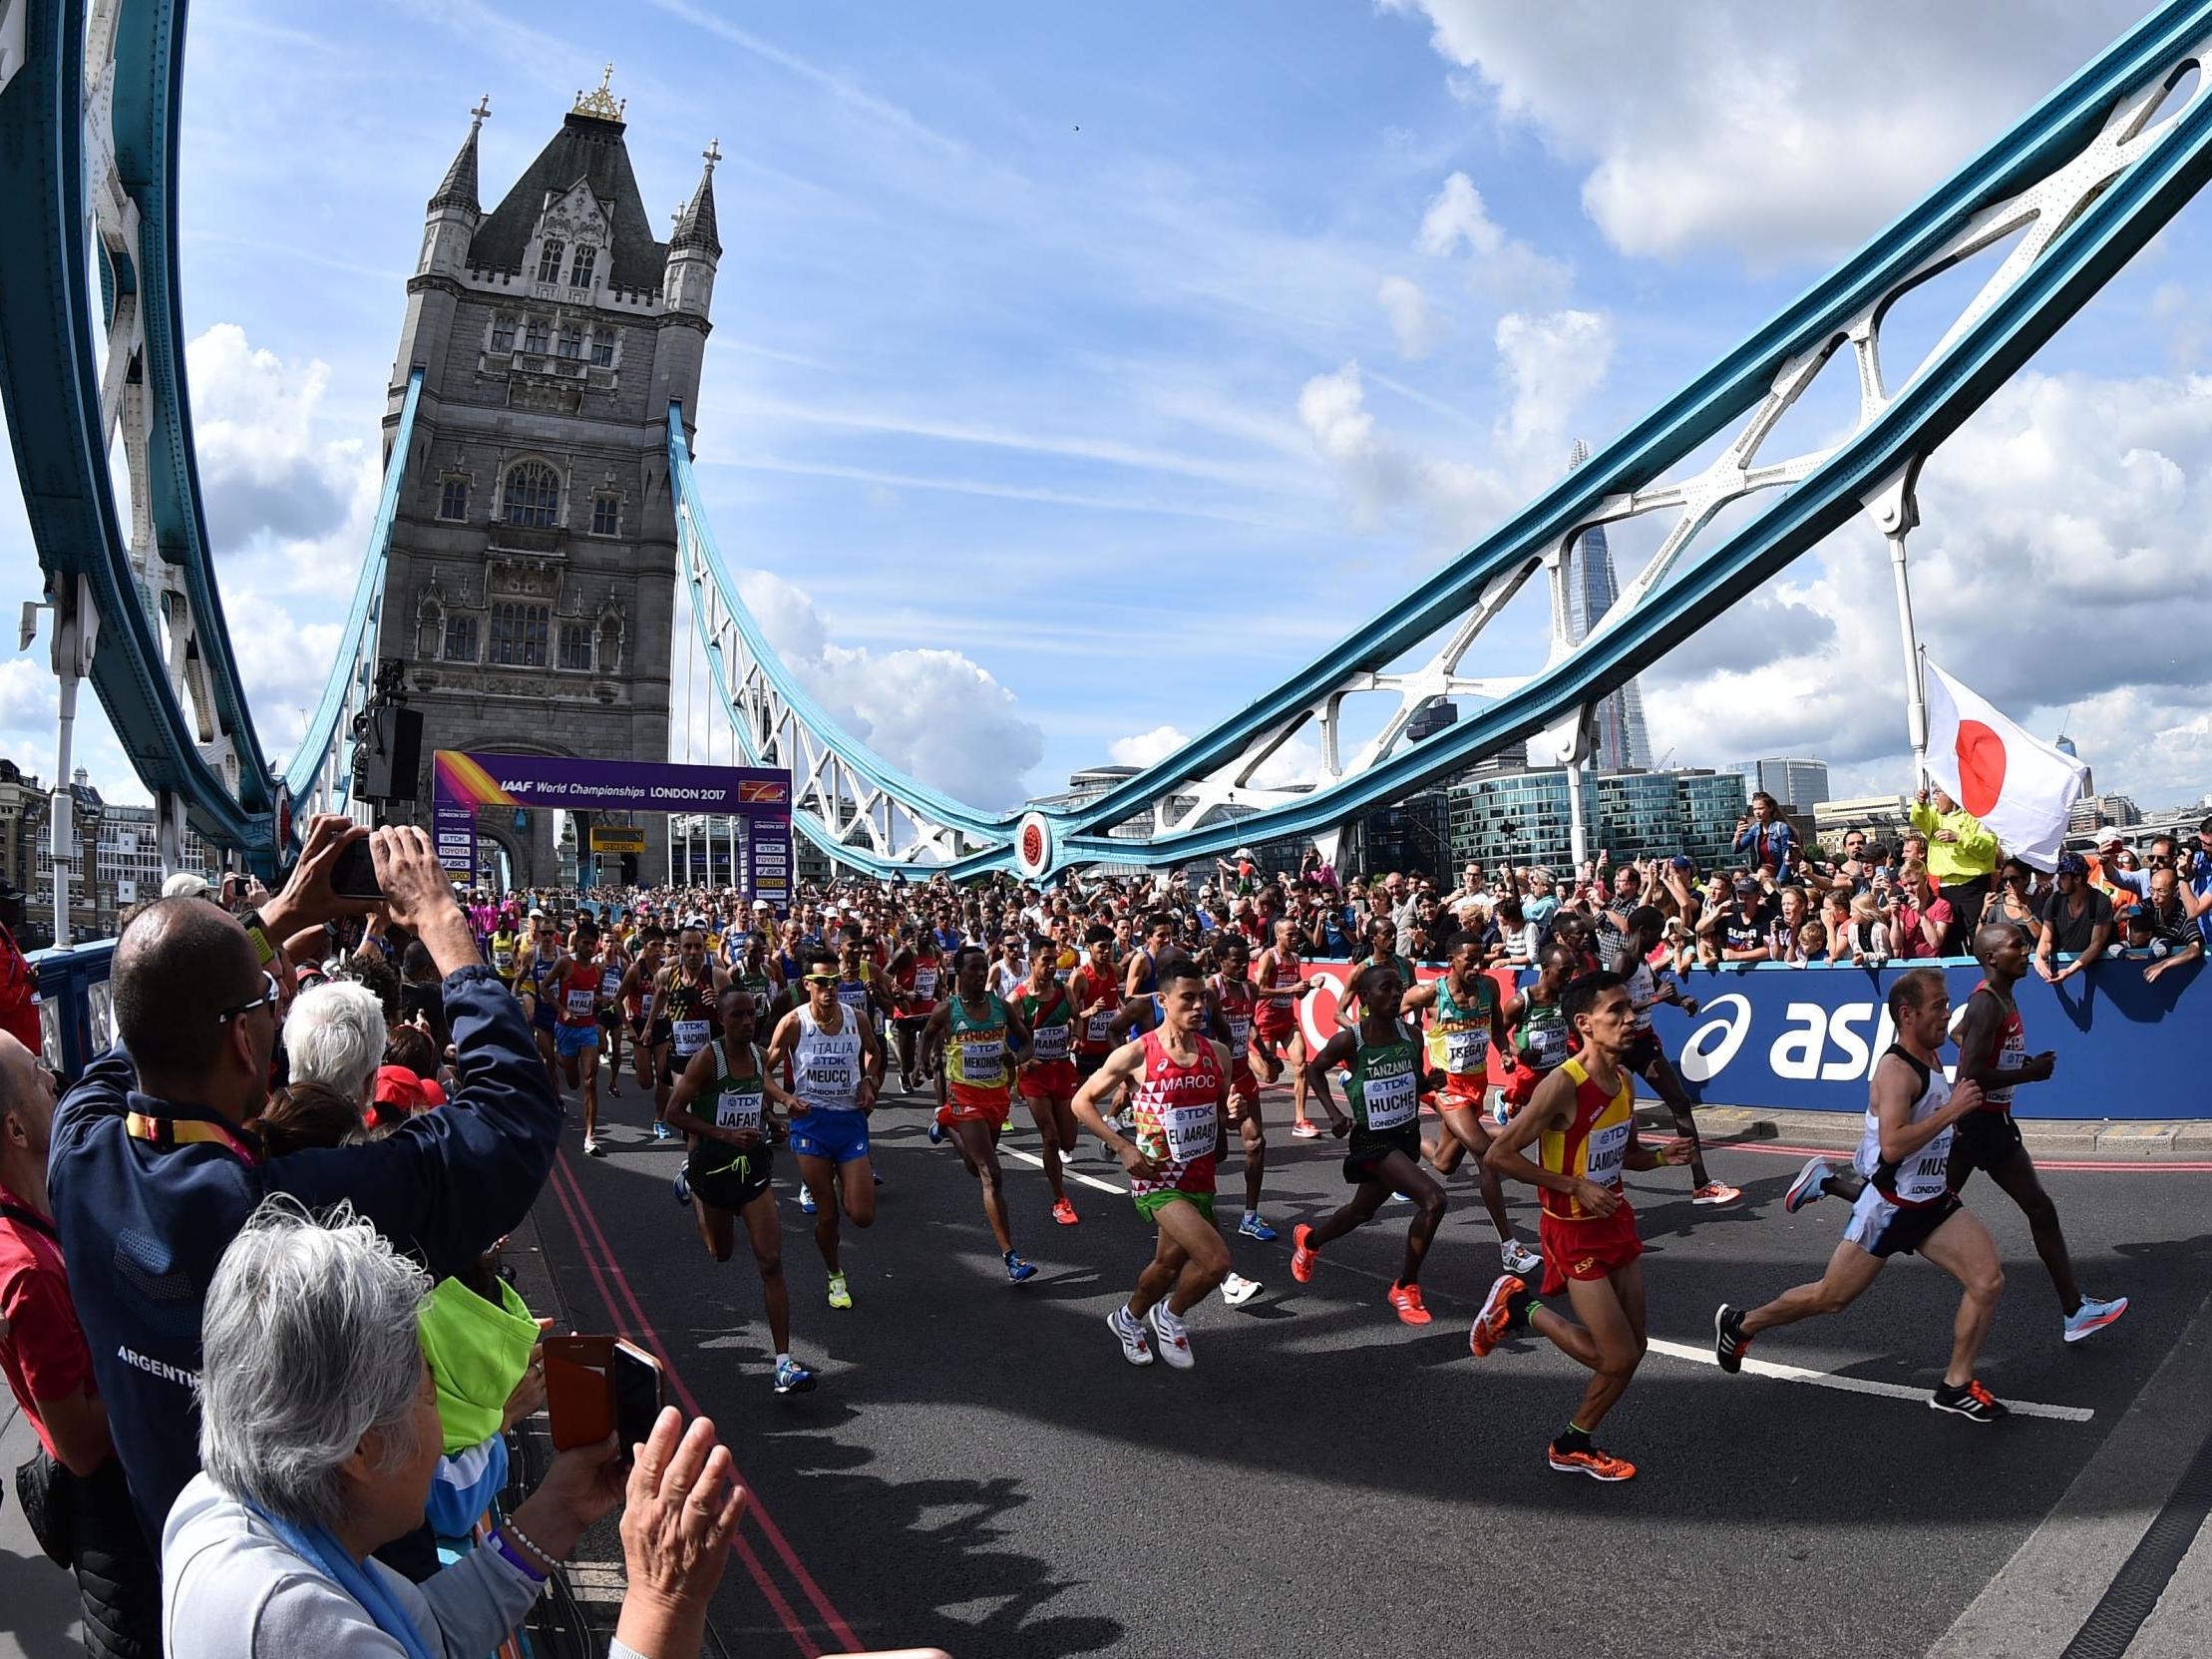 London Marathon How To Apply For 2020 Race - 